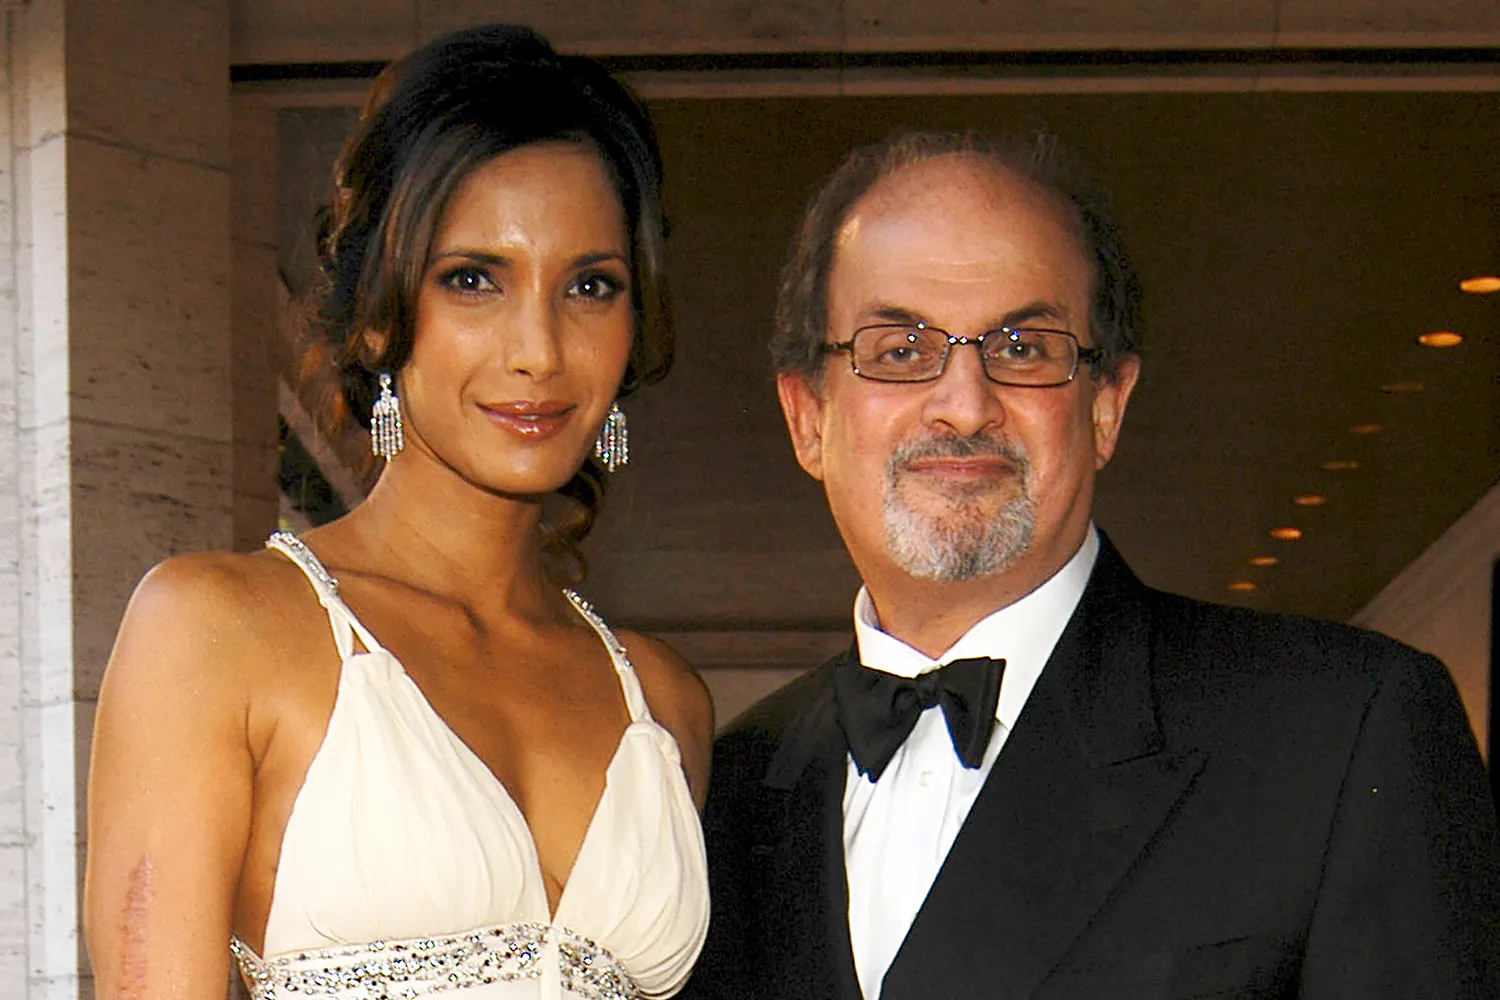 Salman Rushdie's wife and him